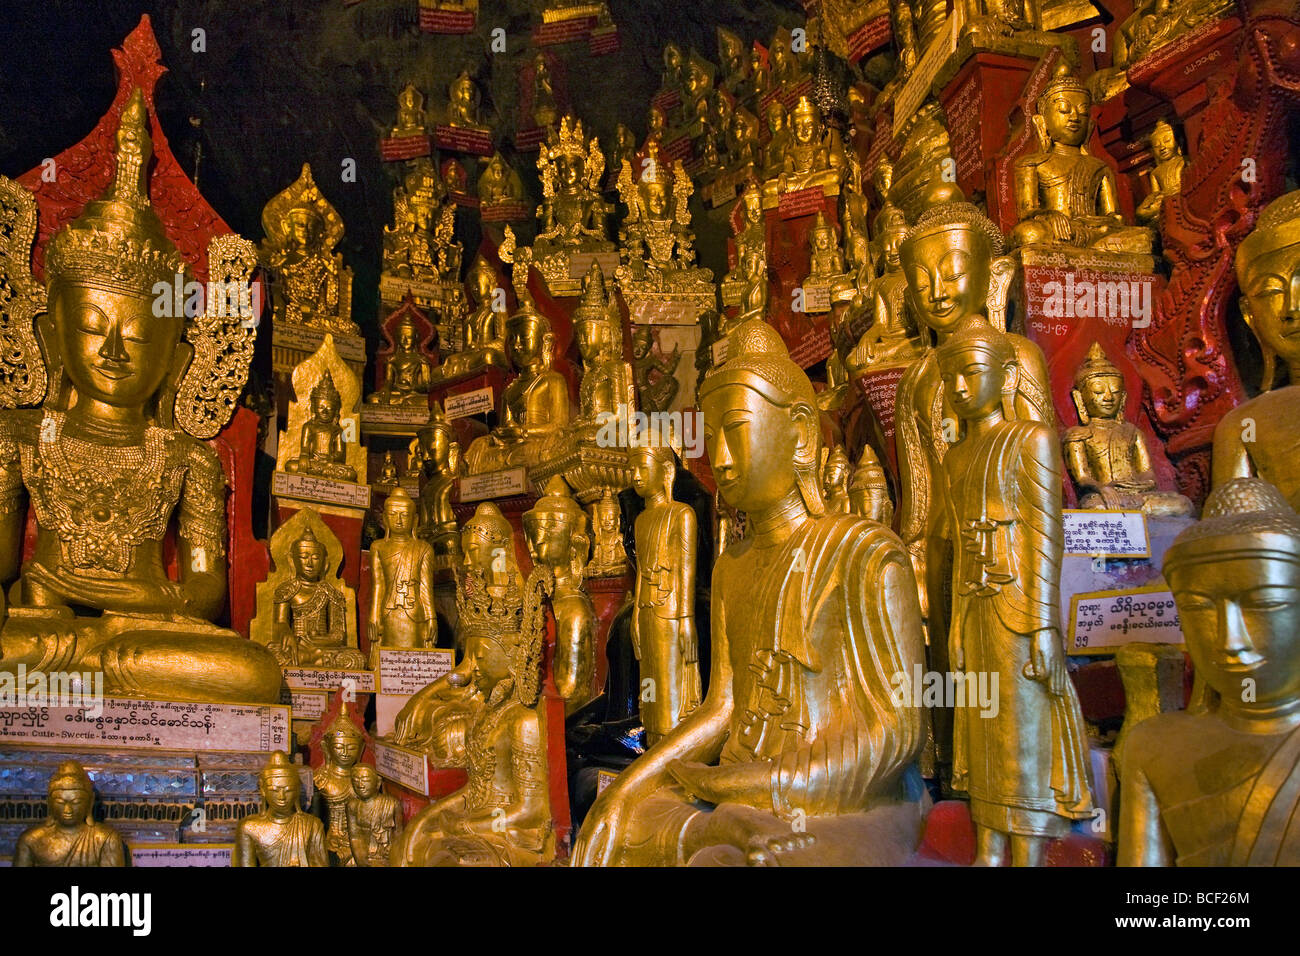 Myanmar. Burma. Pindaya. Some of the 8,000 golden statues of Buddha are housed in the extensive limestone caves at Pindaya. Stock Photo